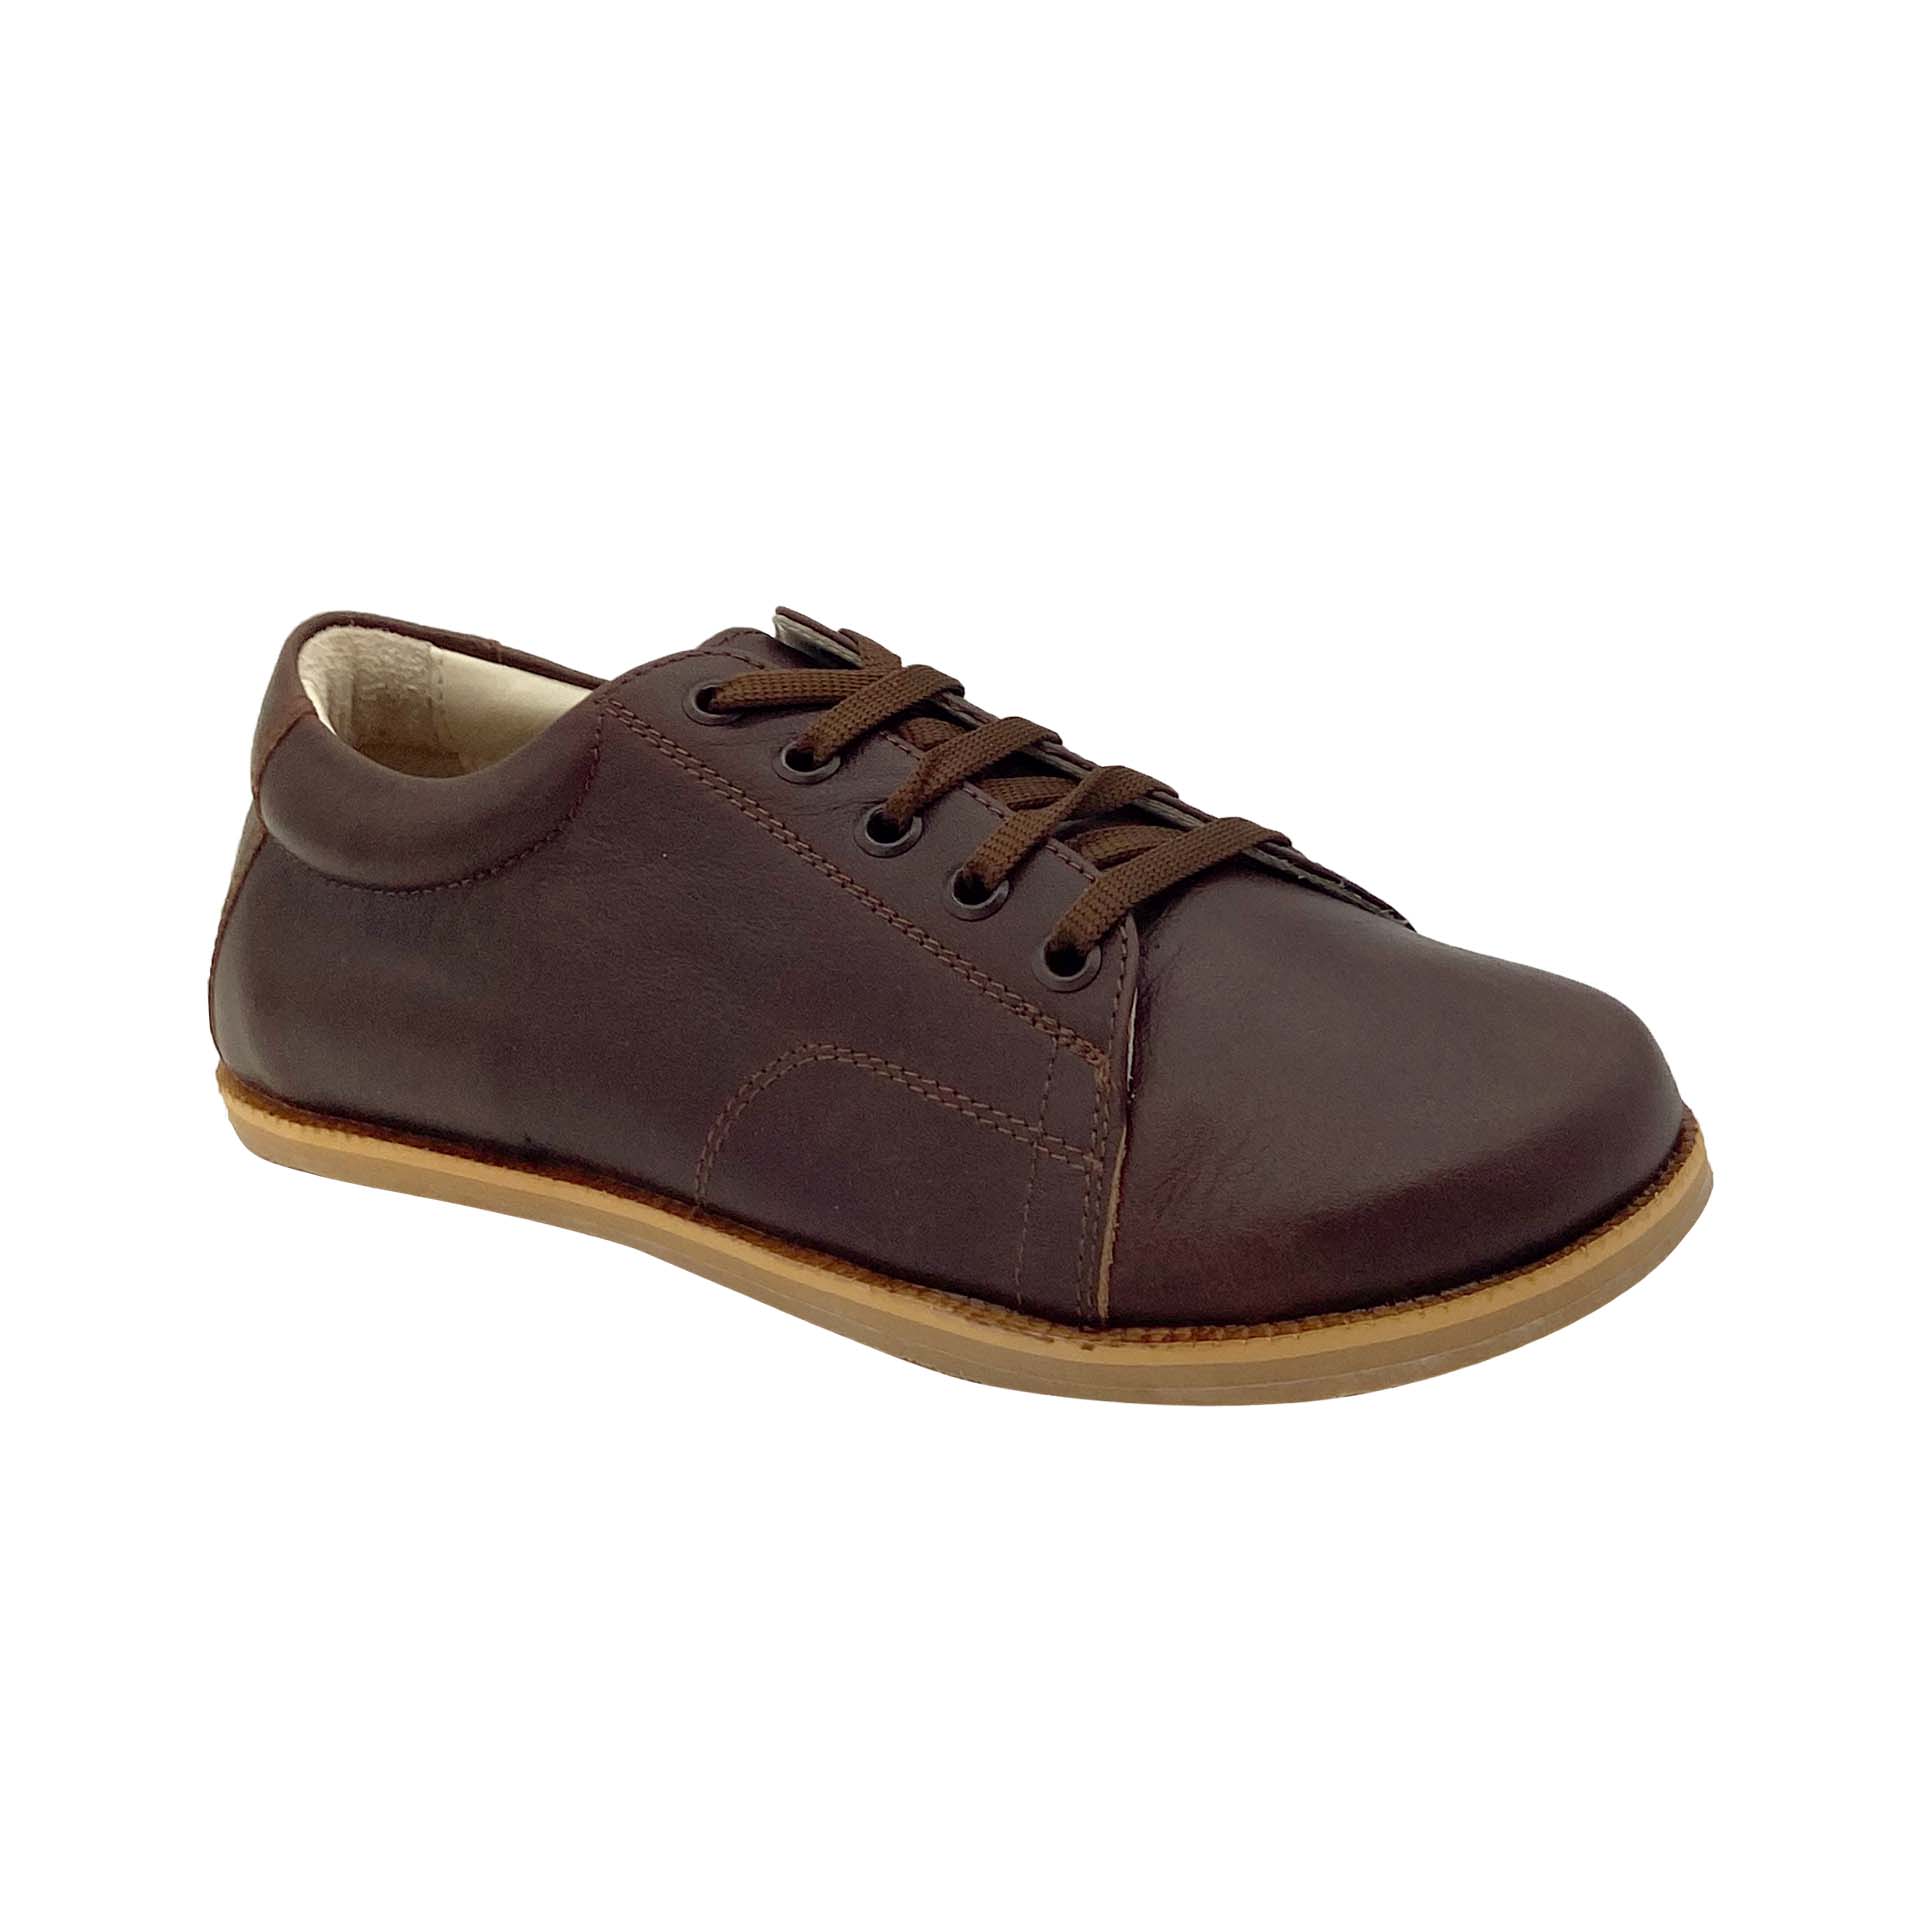 Women's Earthing Shoes Wide with Copper Rivet Leather Walkers